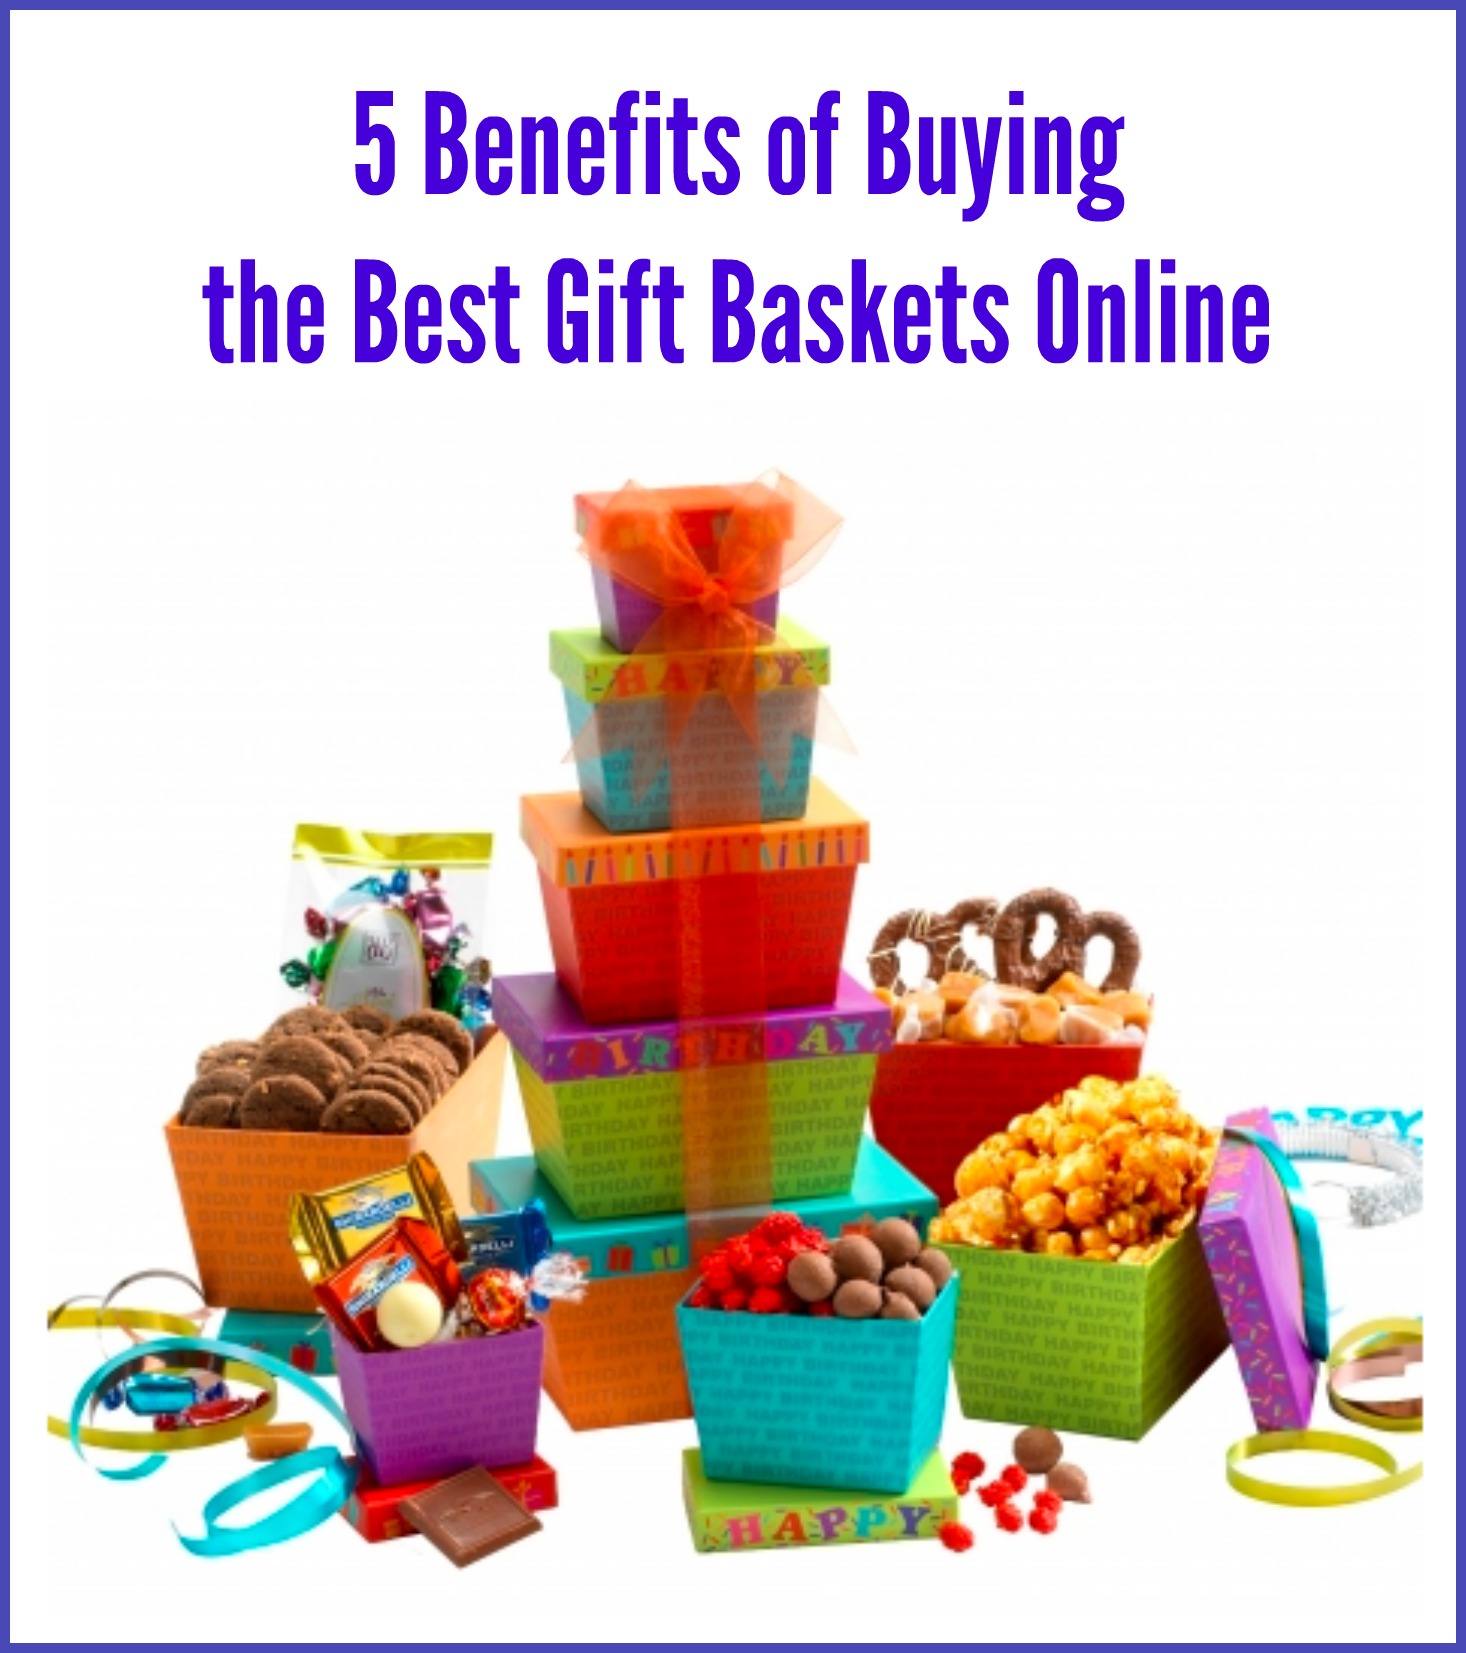 5 Benefits of Buying the Best Gift Baskets Online